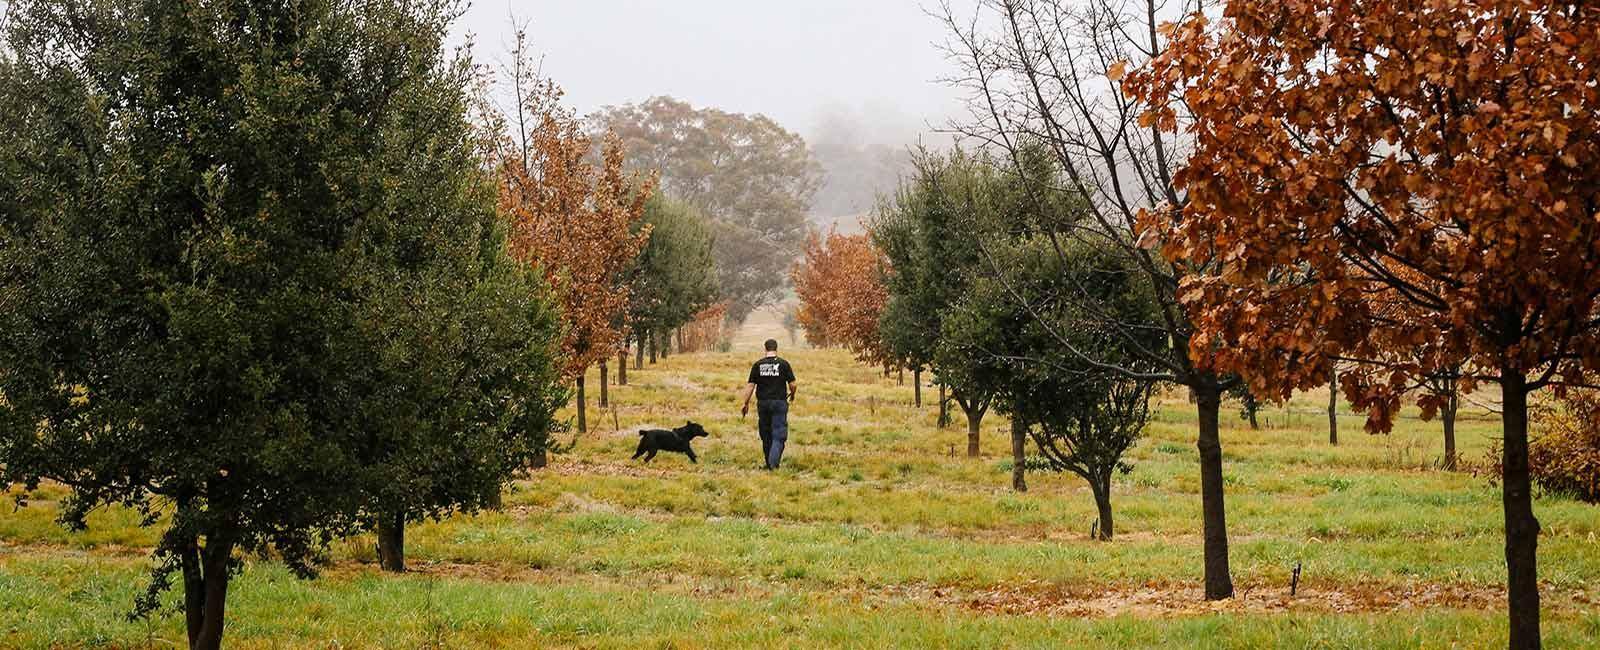 Hunting for truffles at The Truffle Farm, Canberra